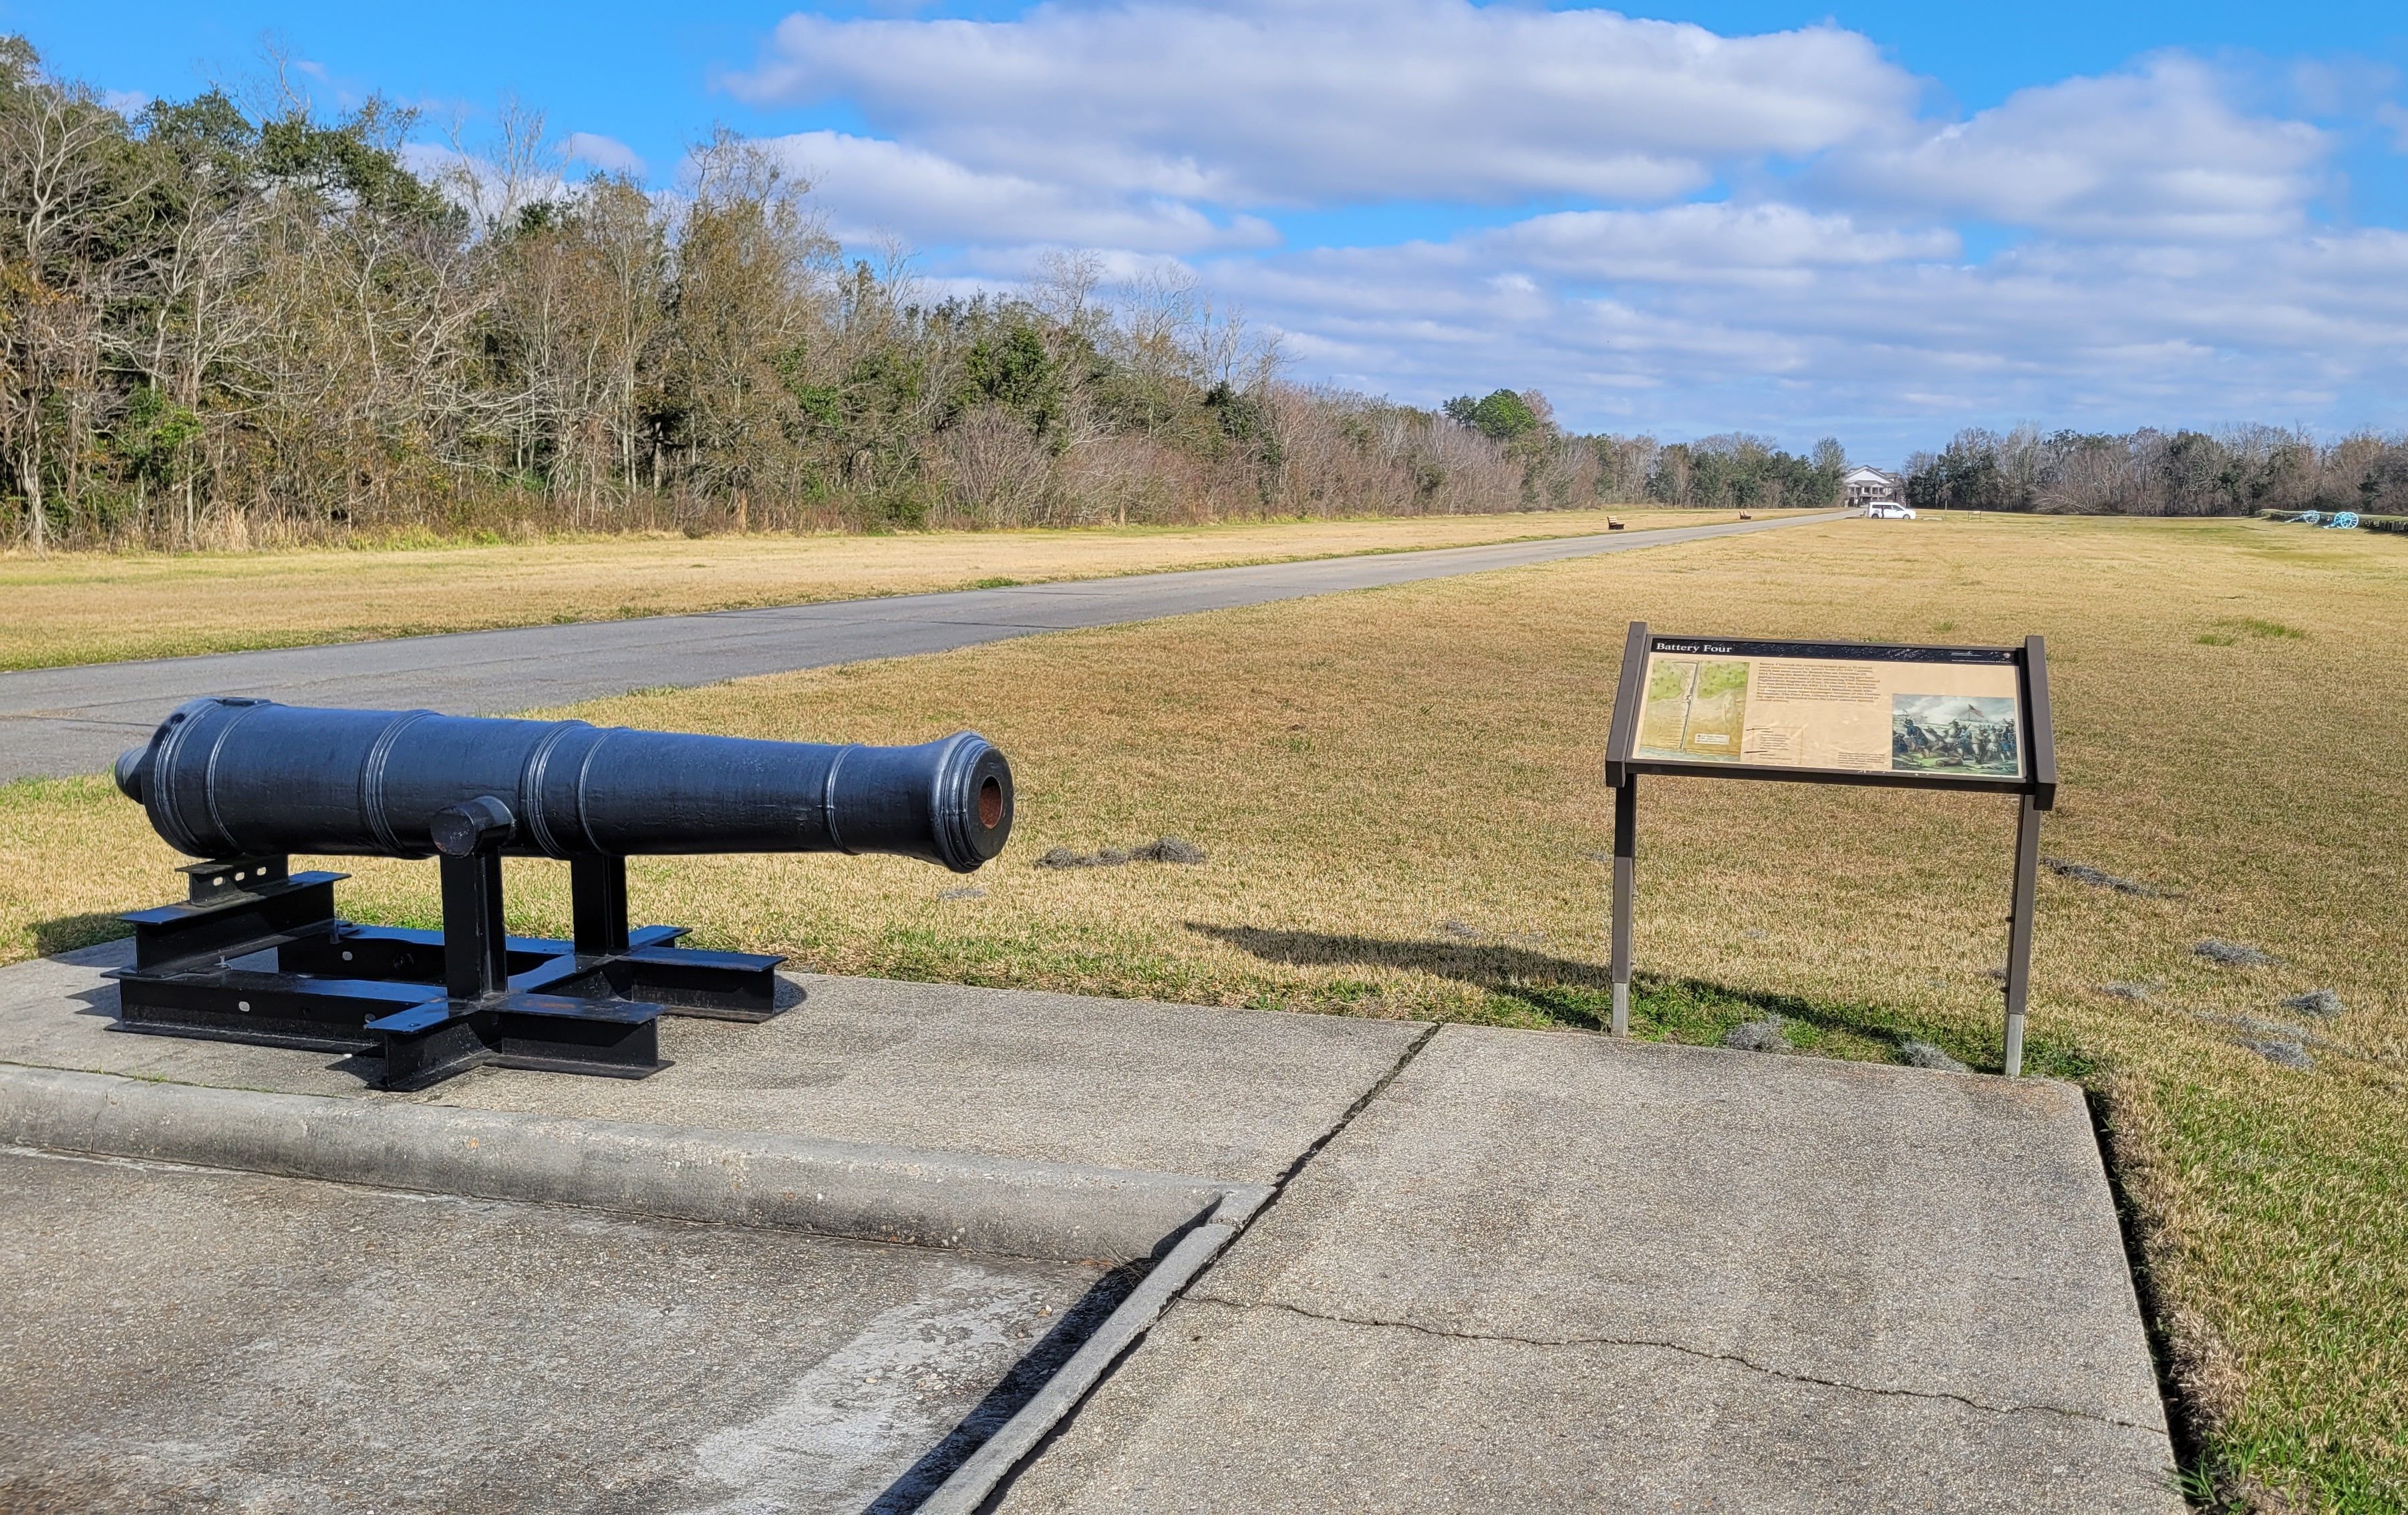 The Battery Four Marker with cannon